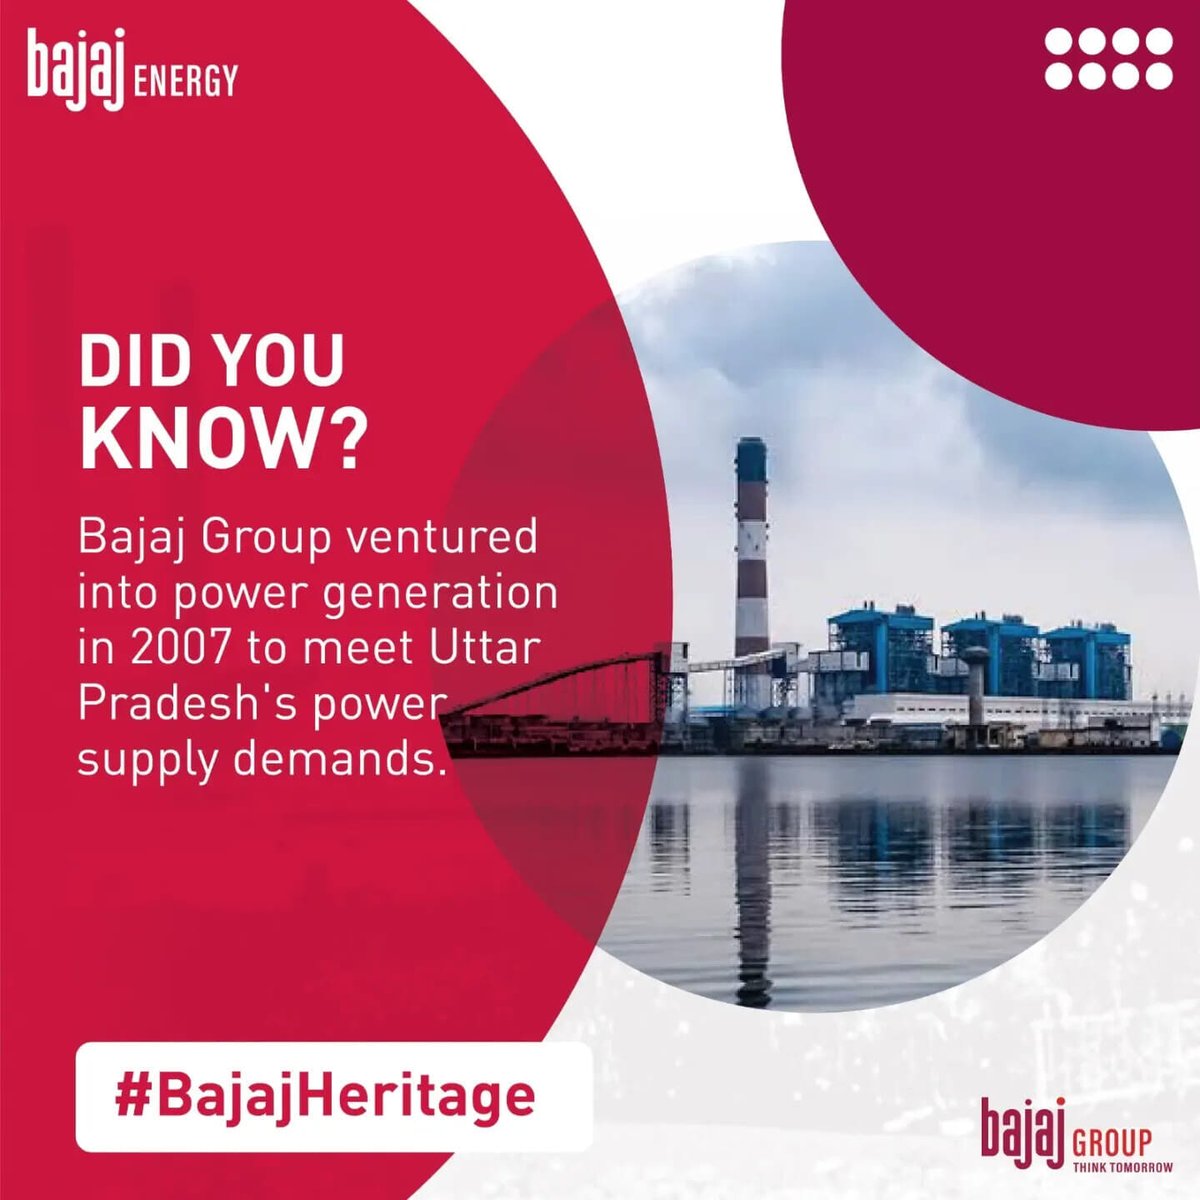 On World Heritage Day, we are proud to revisit the rich history of Bajaj Group led by our noteworthy leaders who worked for India's growth and devlopment througout the past century ! #BajajHeritage #WorldHeritageDay2023 #bajajgroup #lifeatbajaj #historyofbajaj #bajajsugar